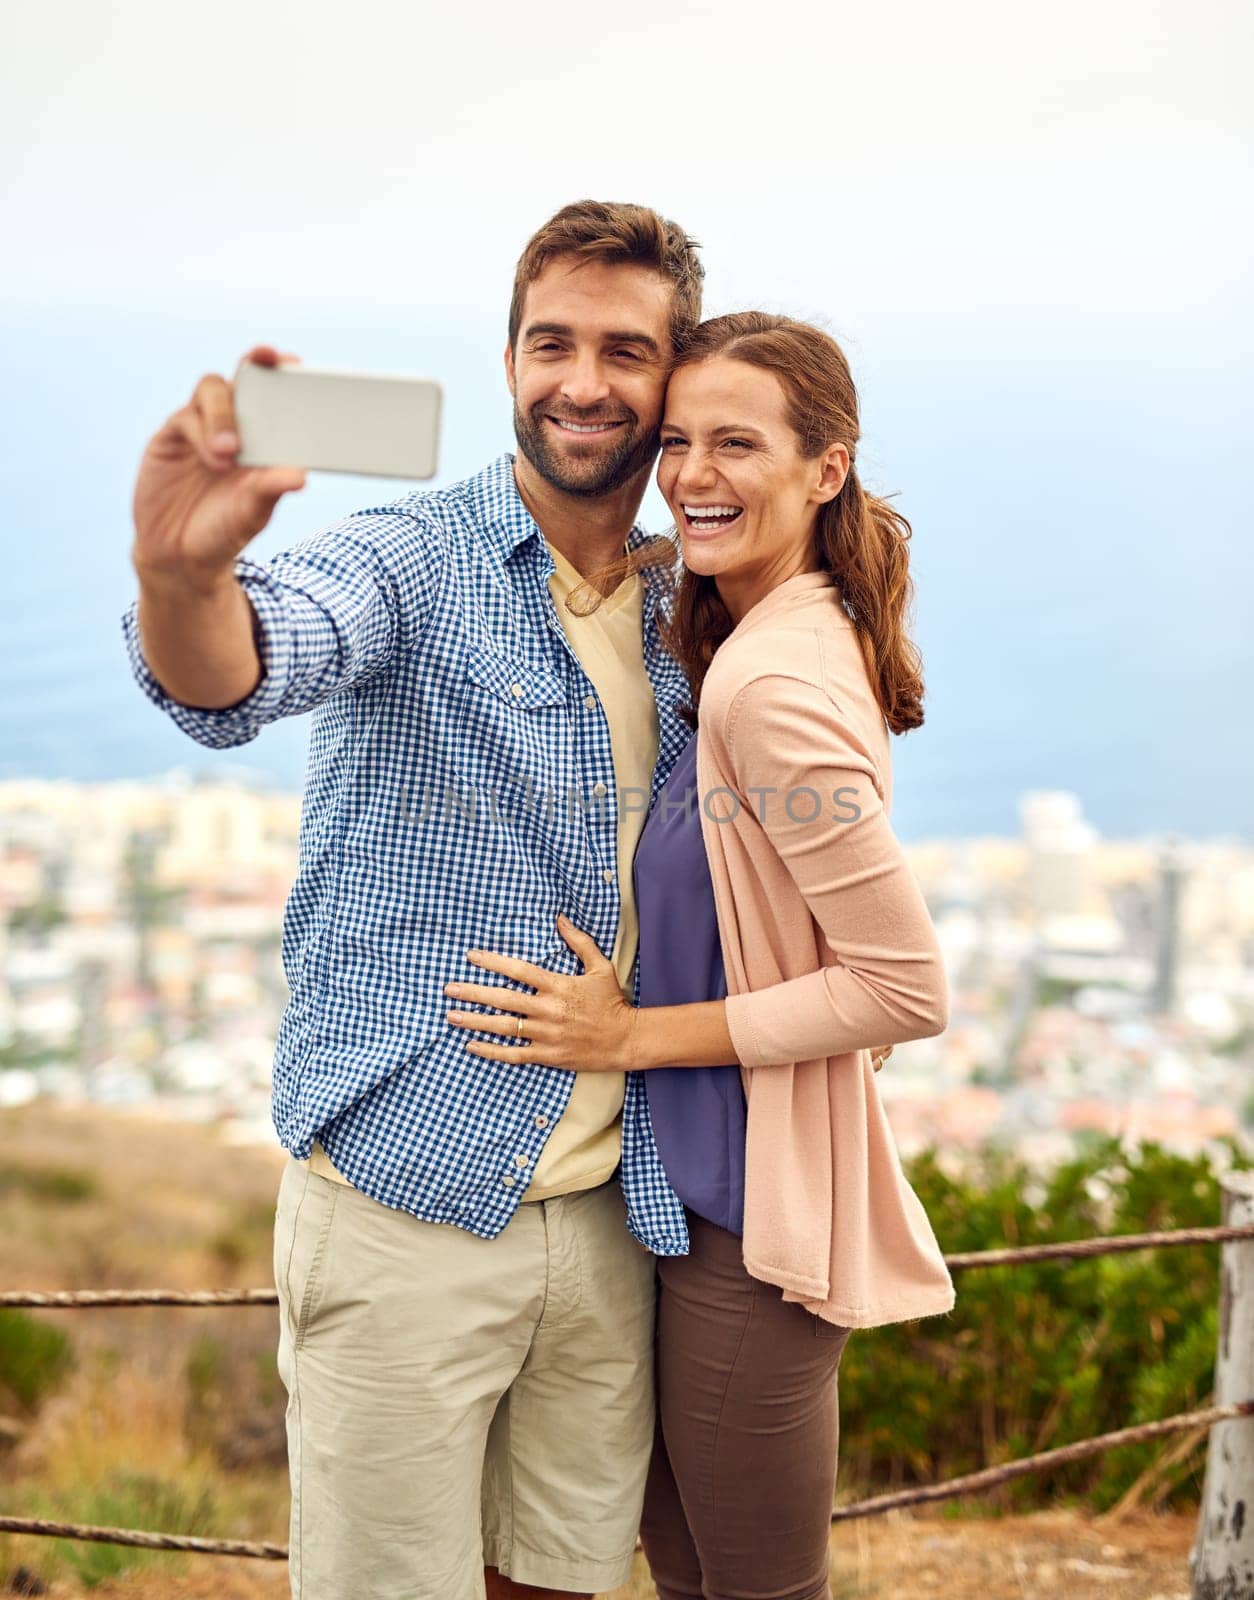 Couple, hug and selfie on phone, love and outdoors on vacation, laughing and memories for social media. Happy people, smartphone and adventure or technology, travel and humor on holiday, fun and joke.